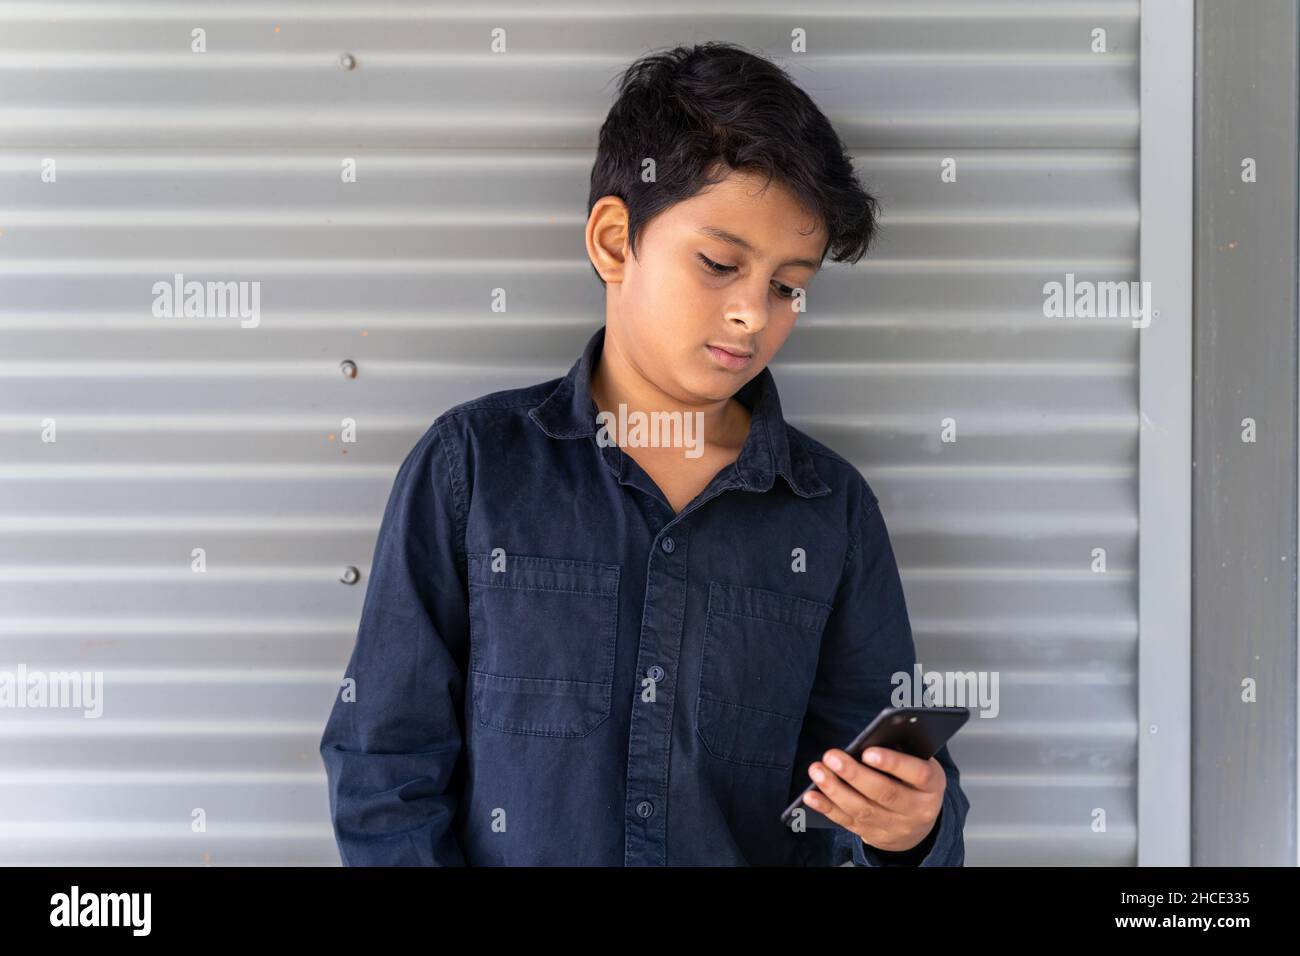 Young boy busy using mobile phone. Concept of young child using social media on his mobile. Stock Photo